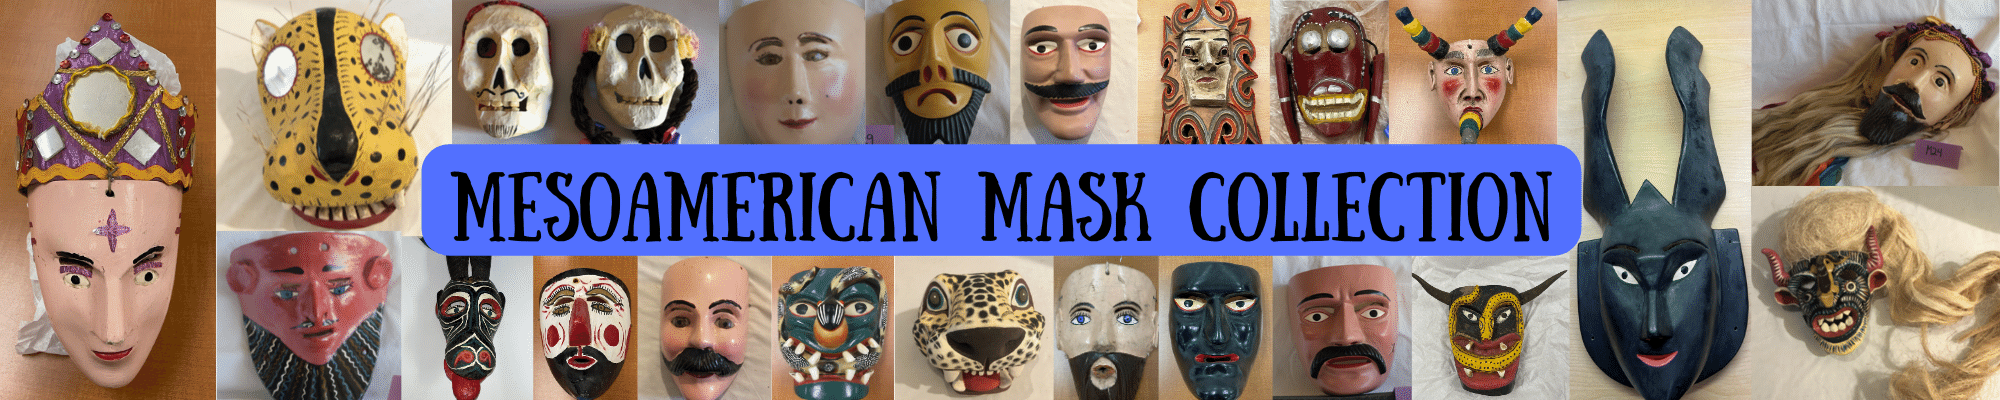 masks from Latin America